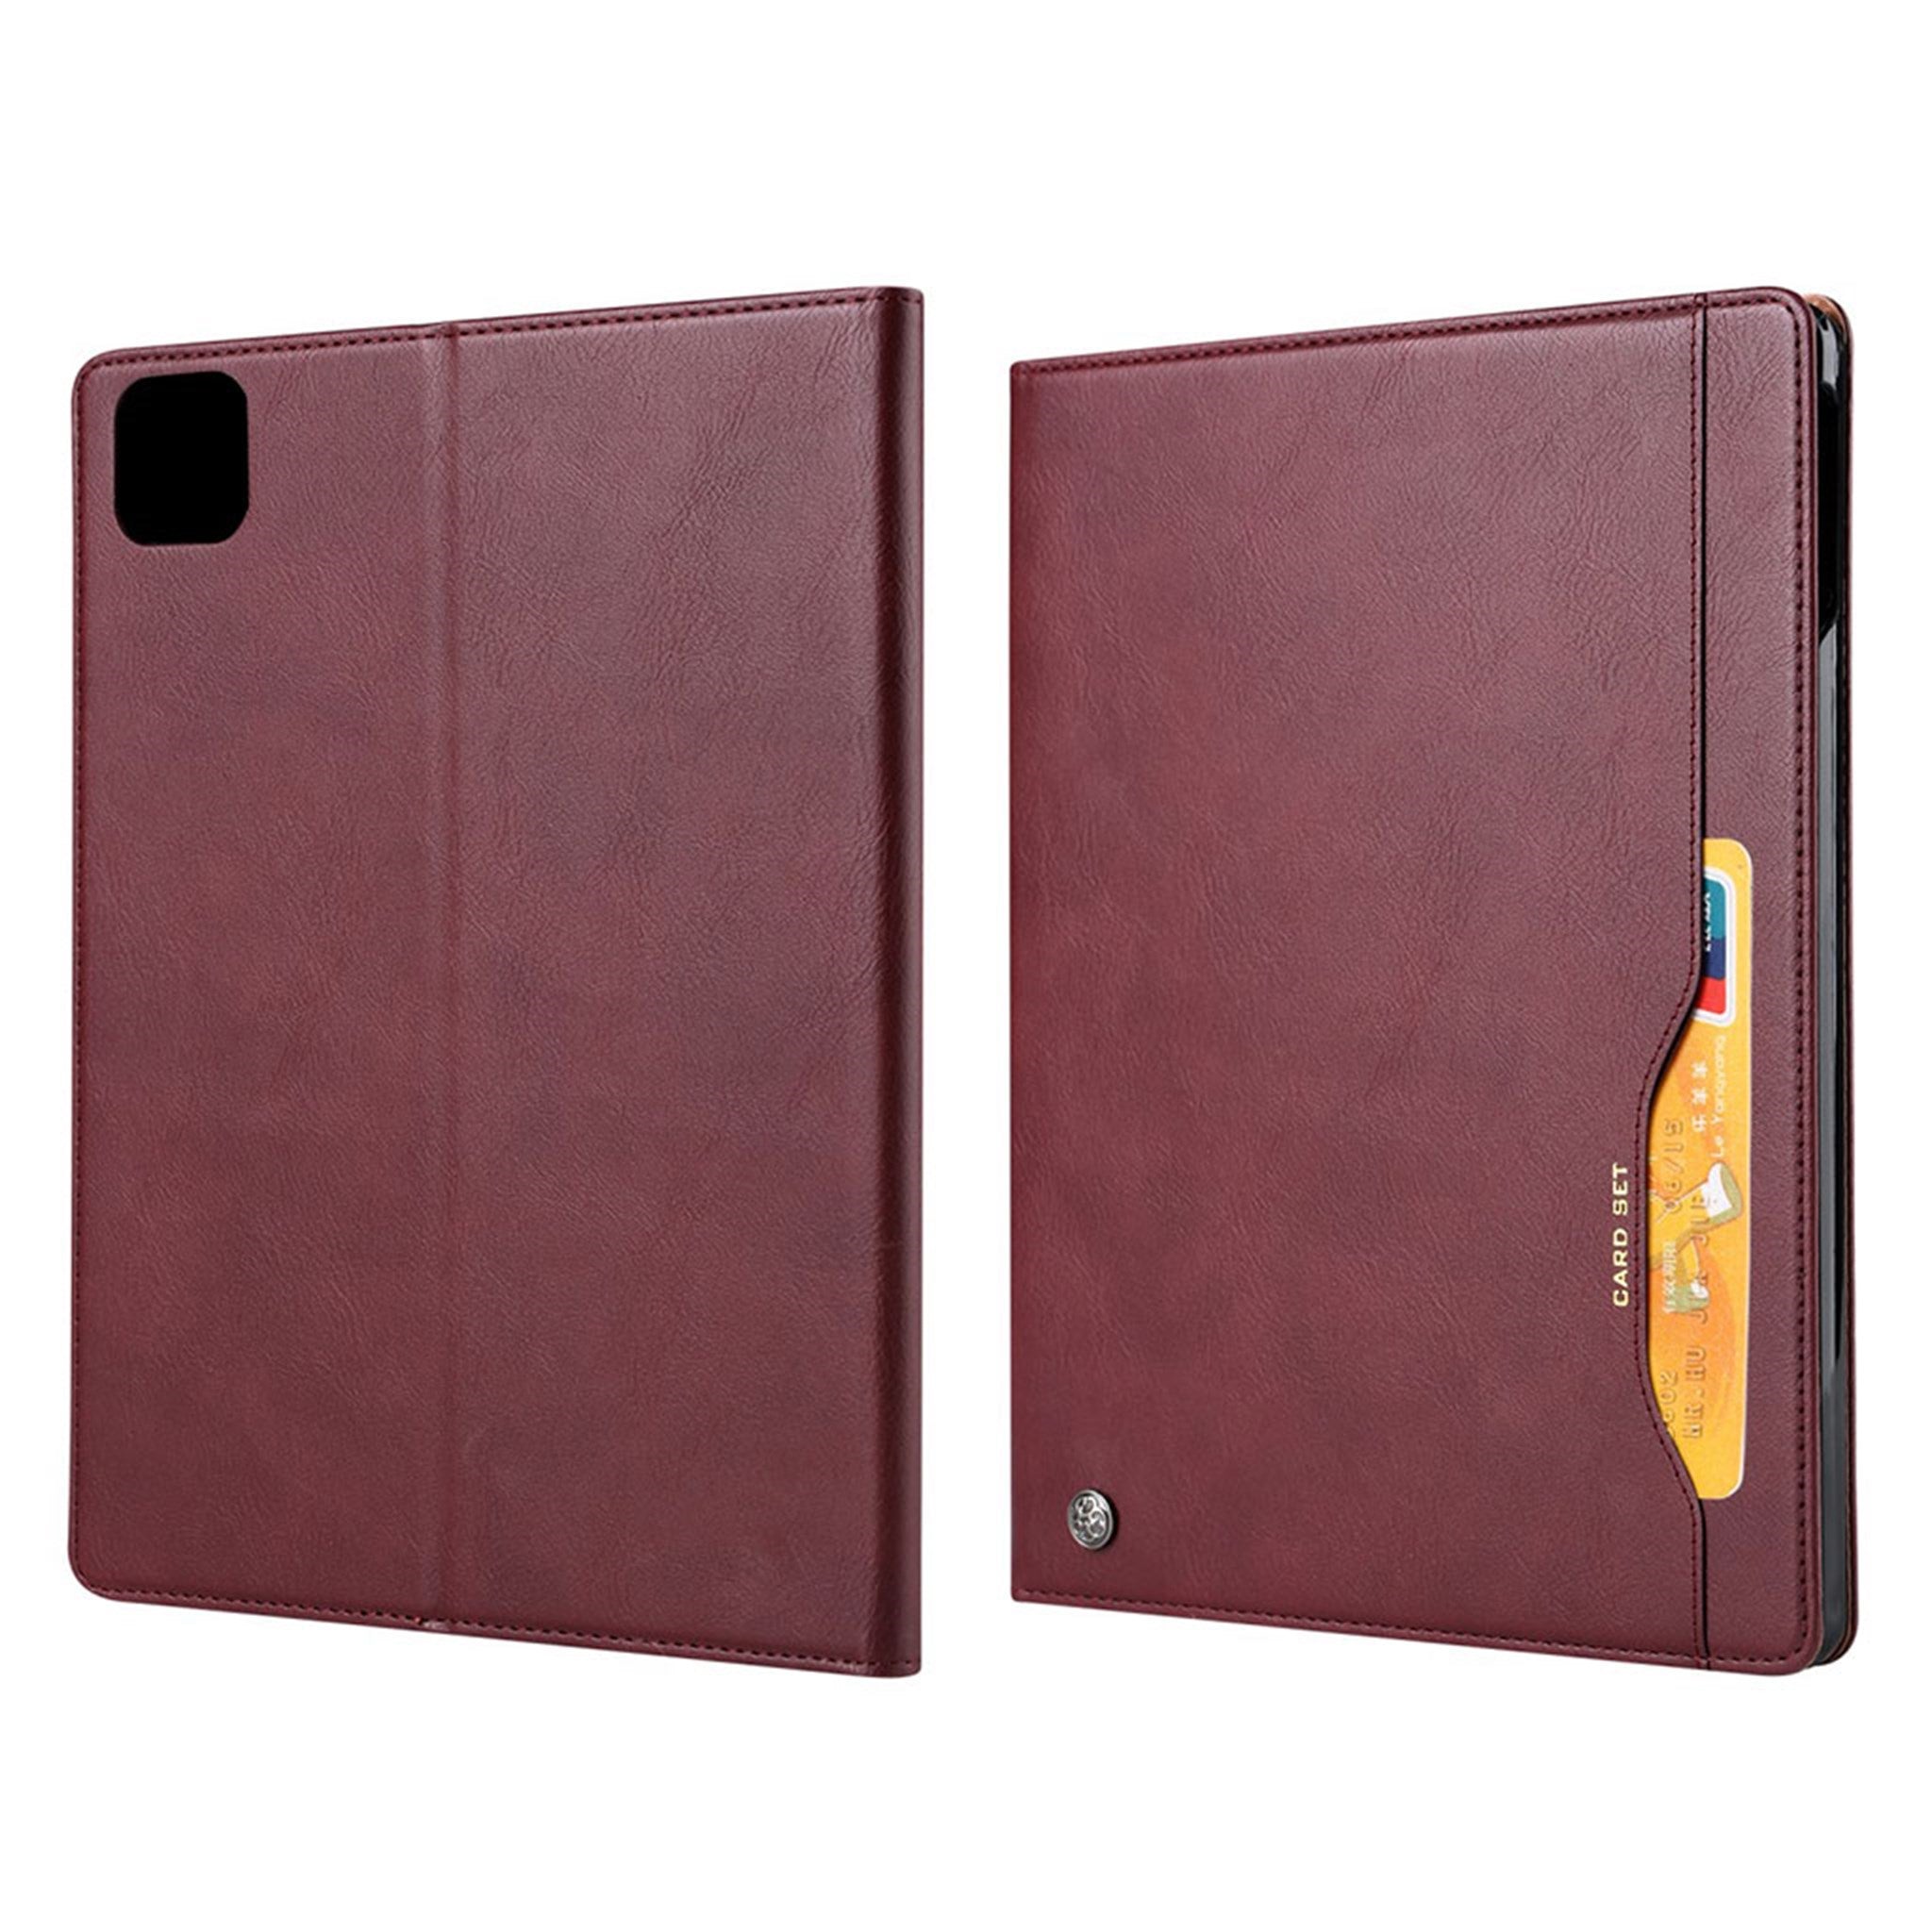 iPad Air (2020) durable leather flip case - Wine Red